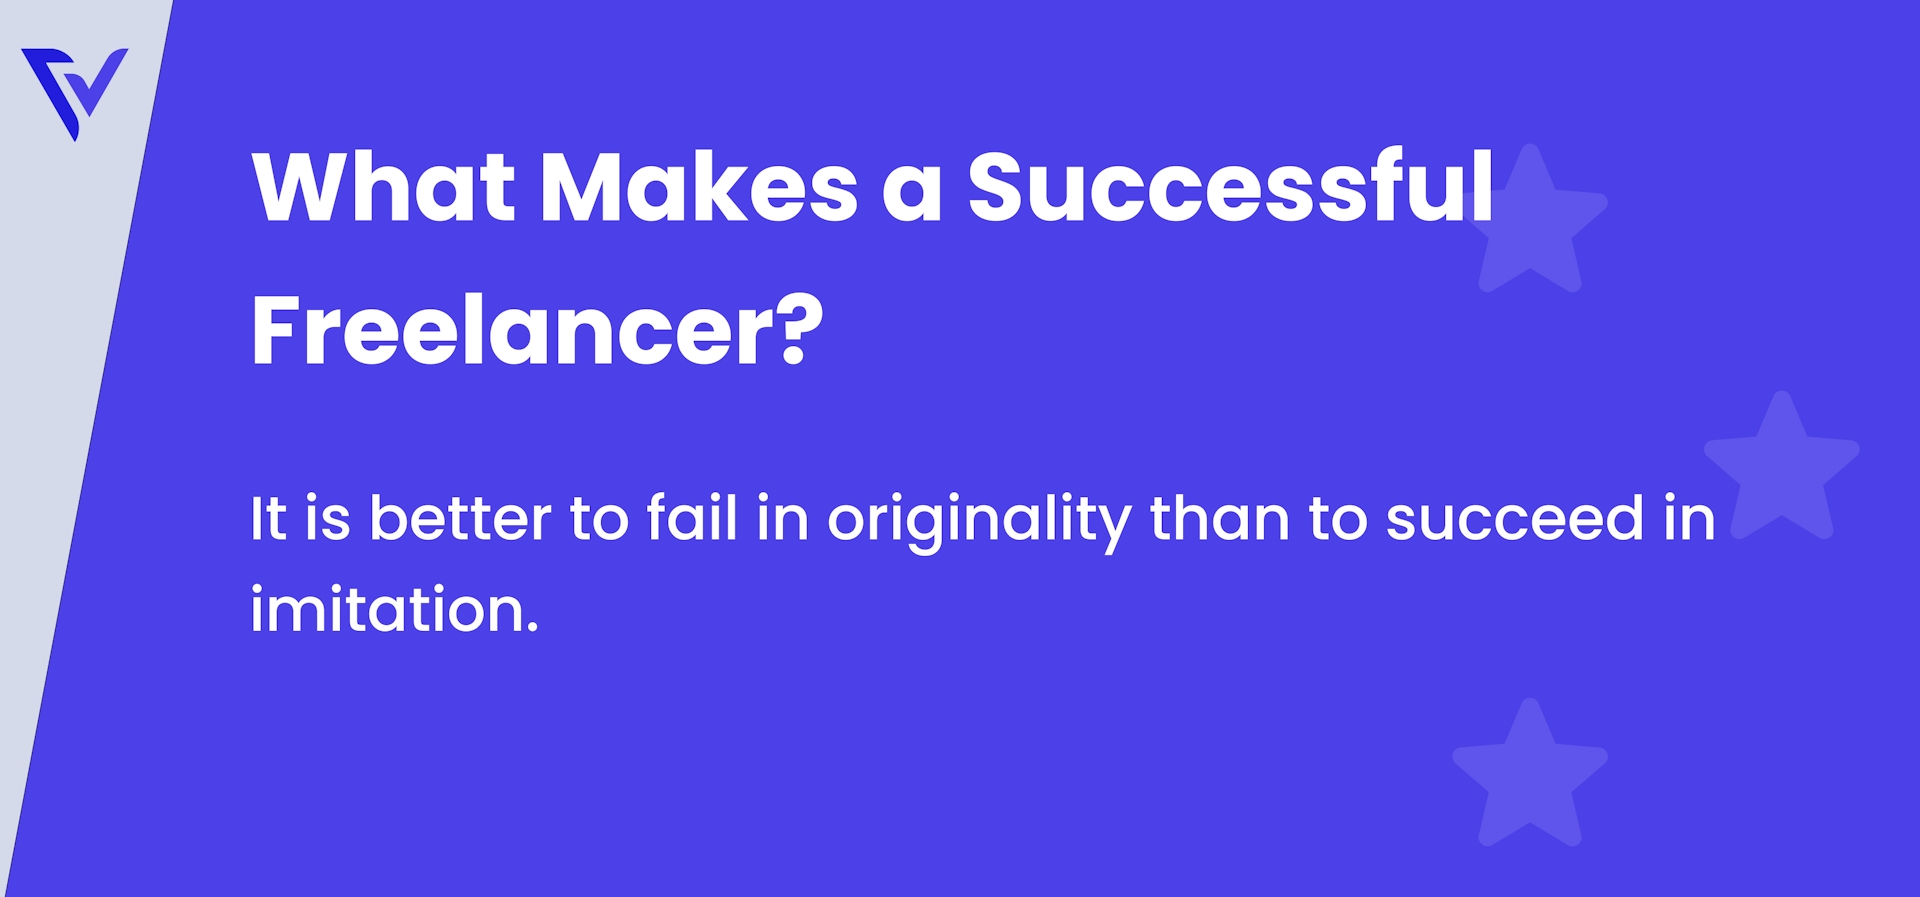 What makes a successful freelancer?